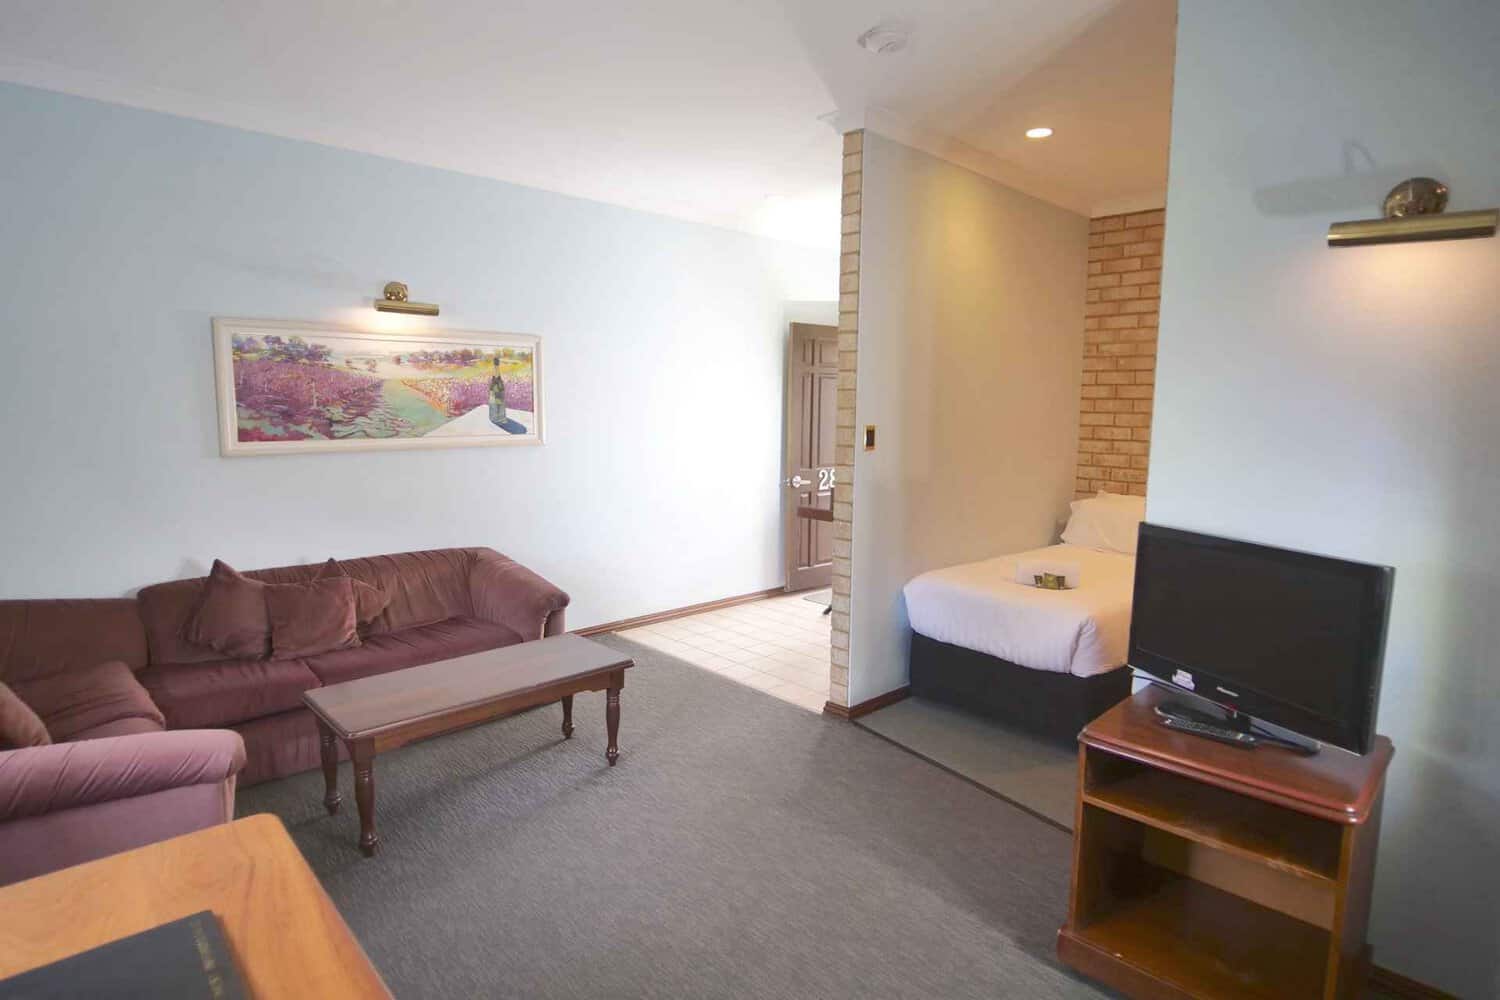 A practical 2.5-star hotel room featuring a living area with a couch, TV, coffee table, and a single bed, providing affordable comfort and convenience for guests.